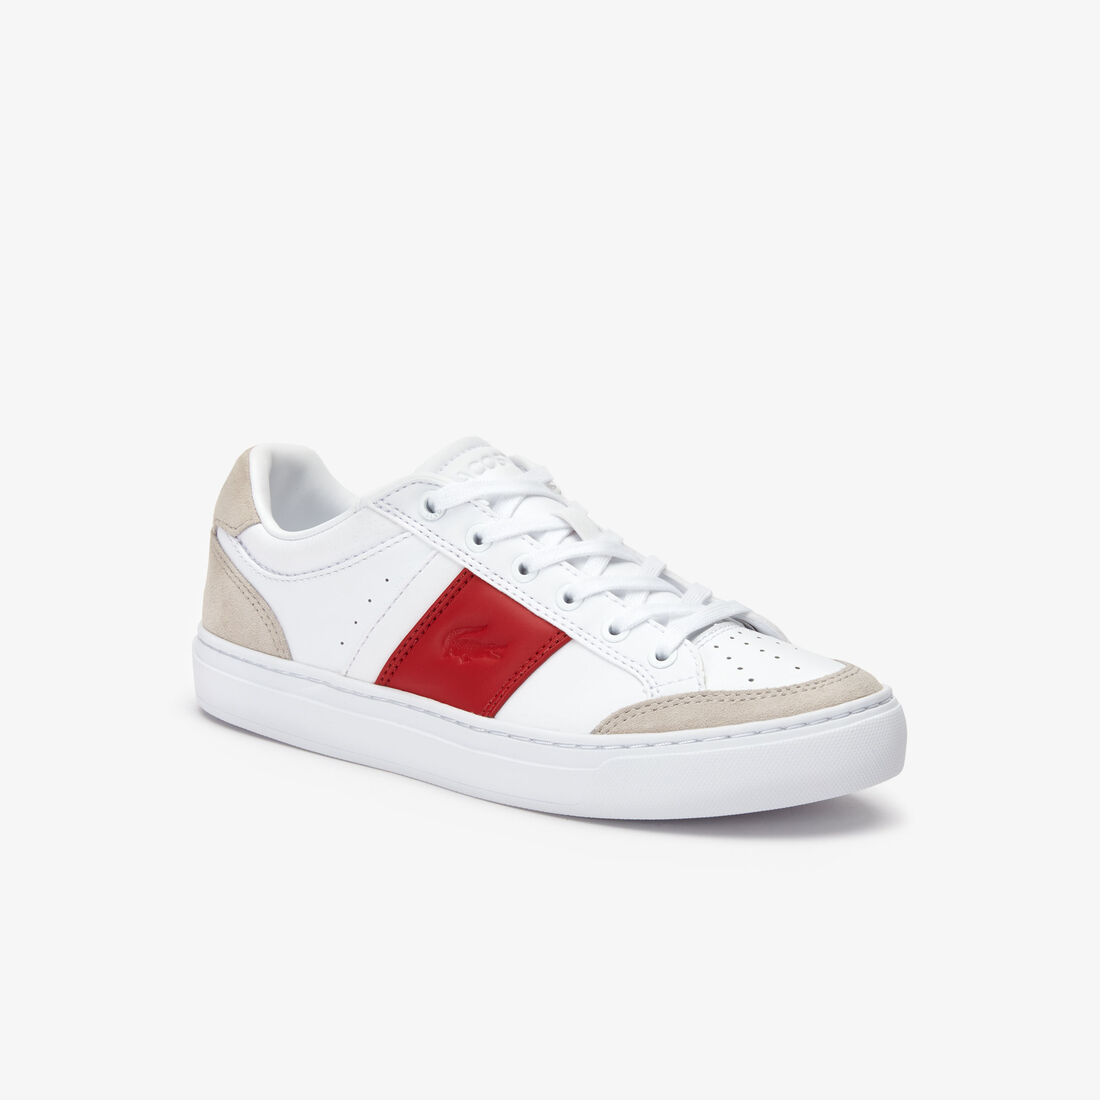 Men's Courtline Leather and Suede Trainers